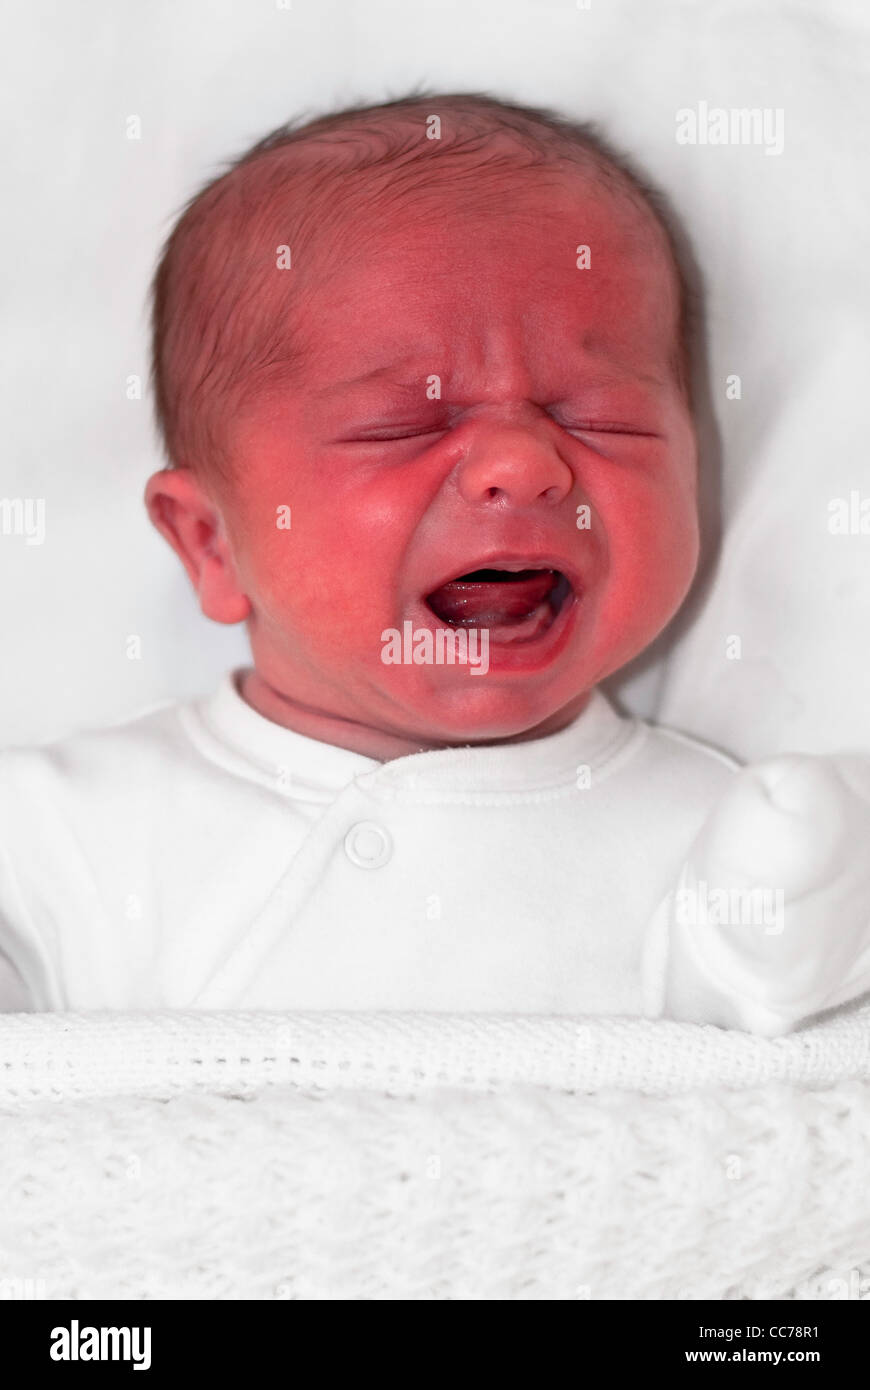 Crying baby with red face Stock Photo - Alamy